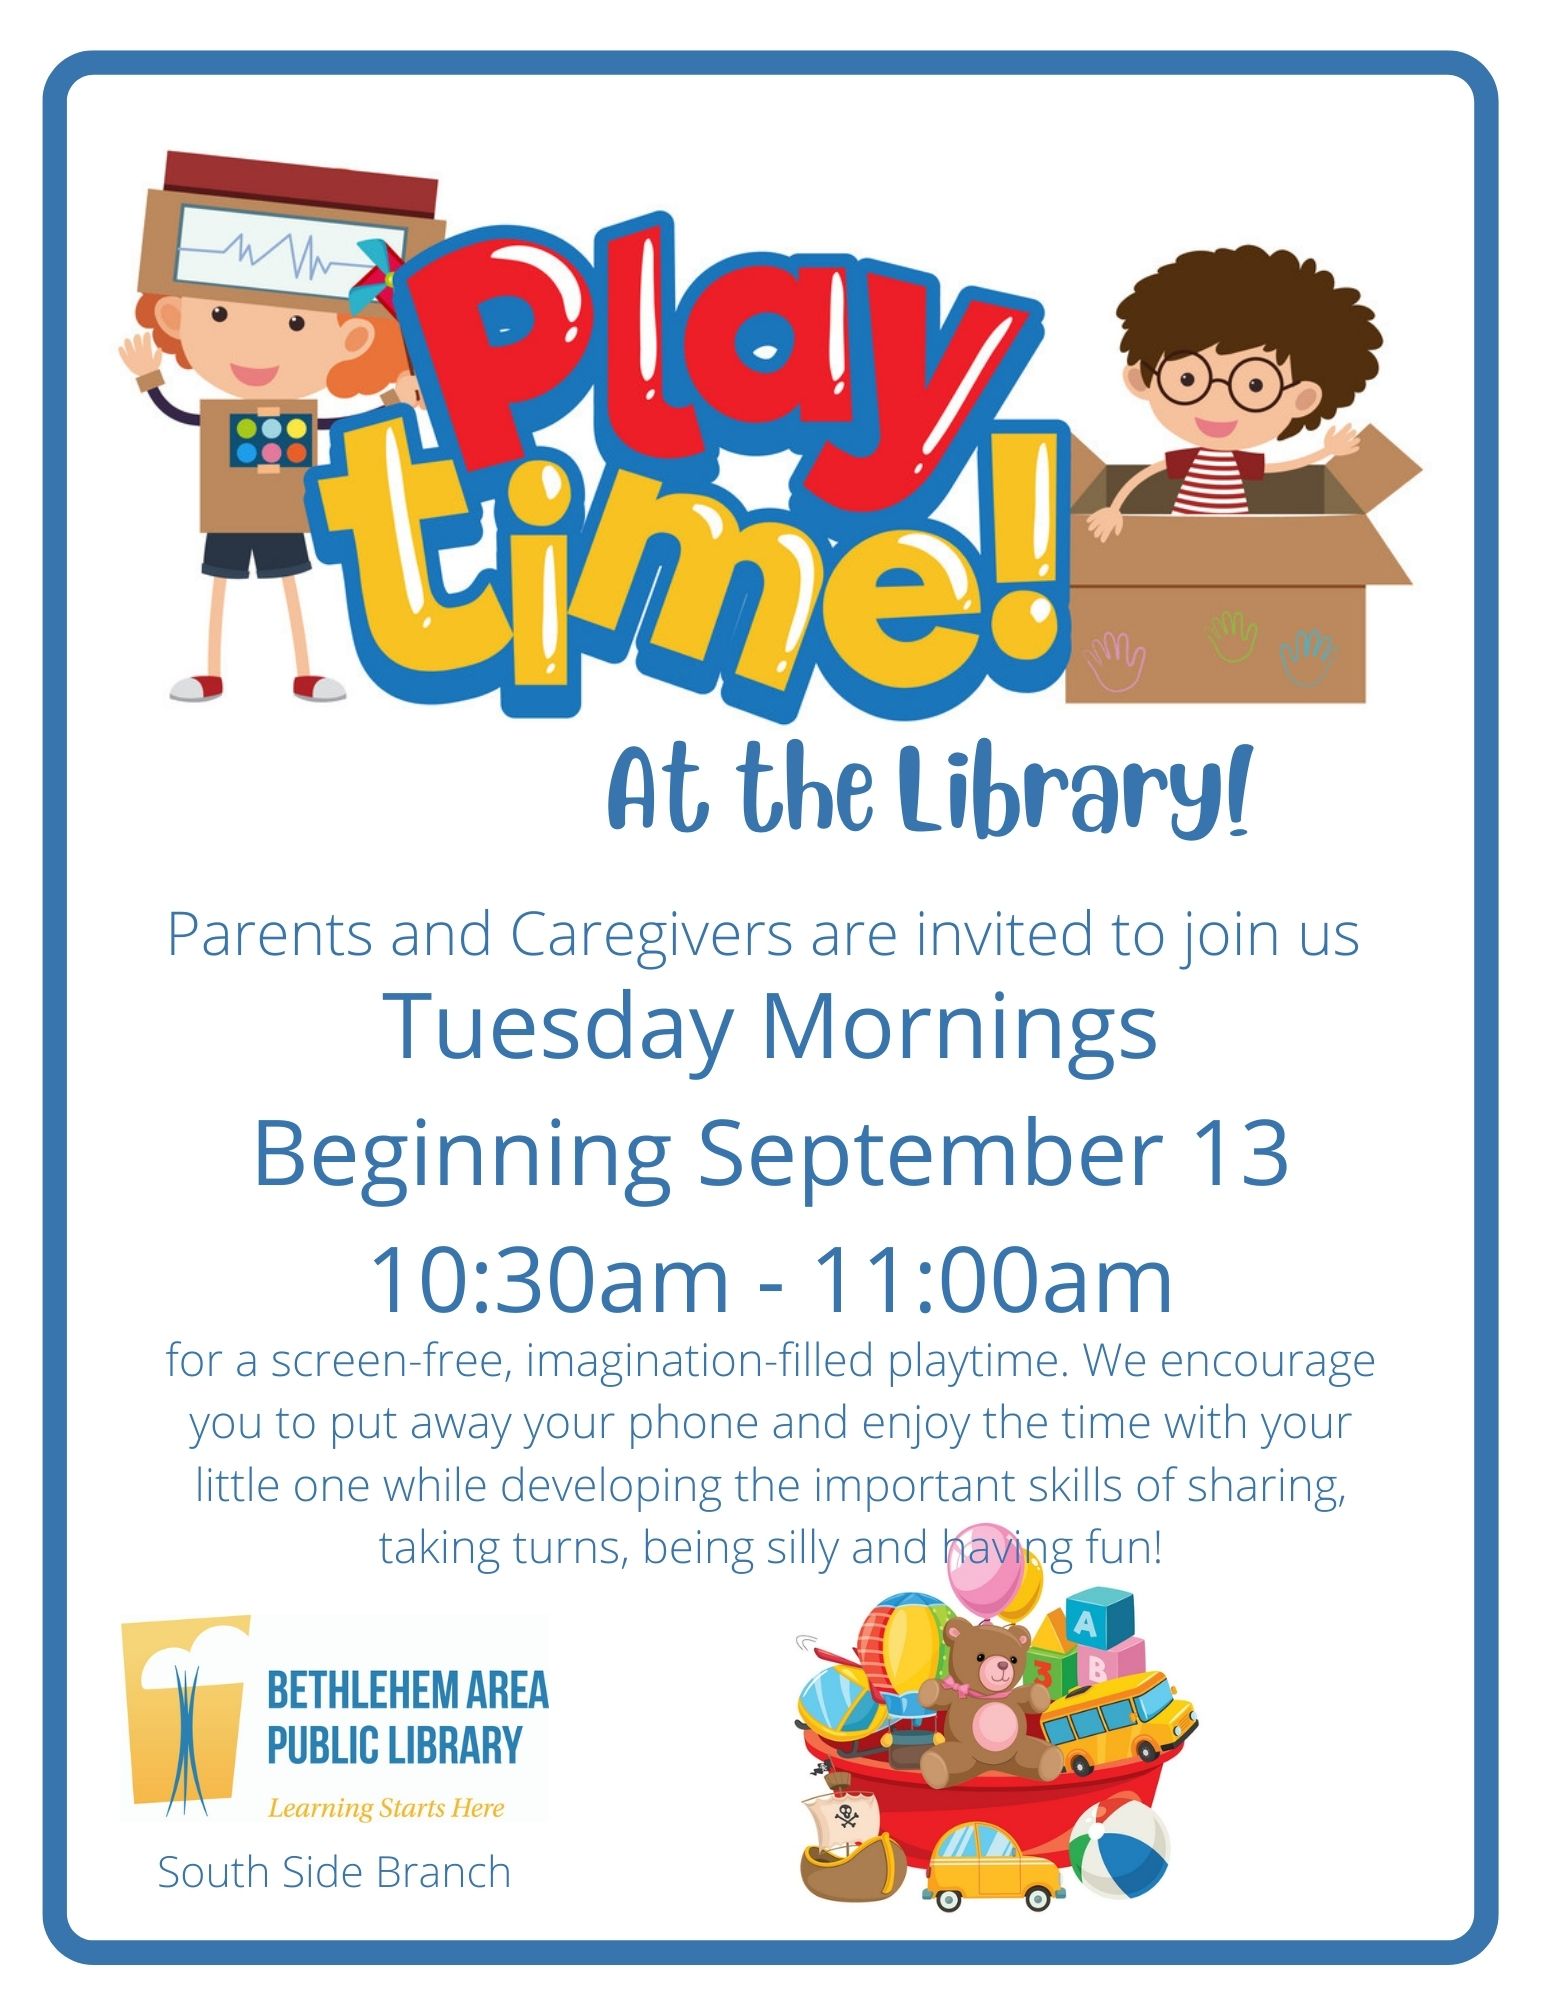 Join us for an old fashioned imaginative playgroup!